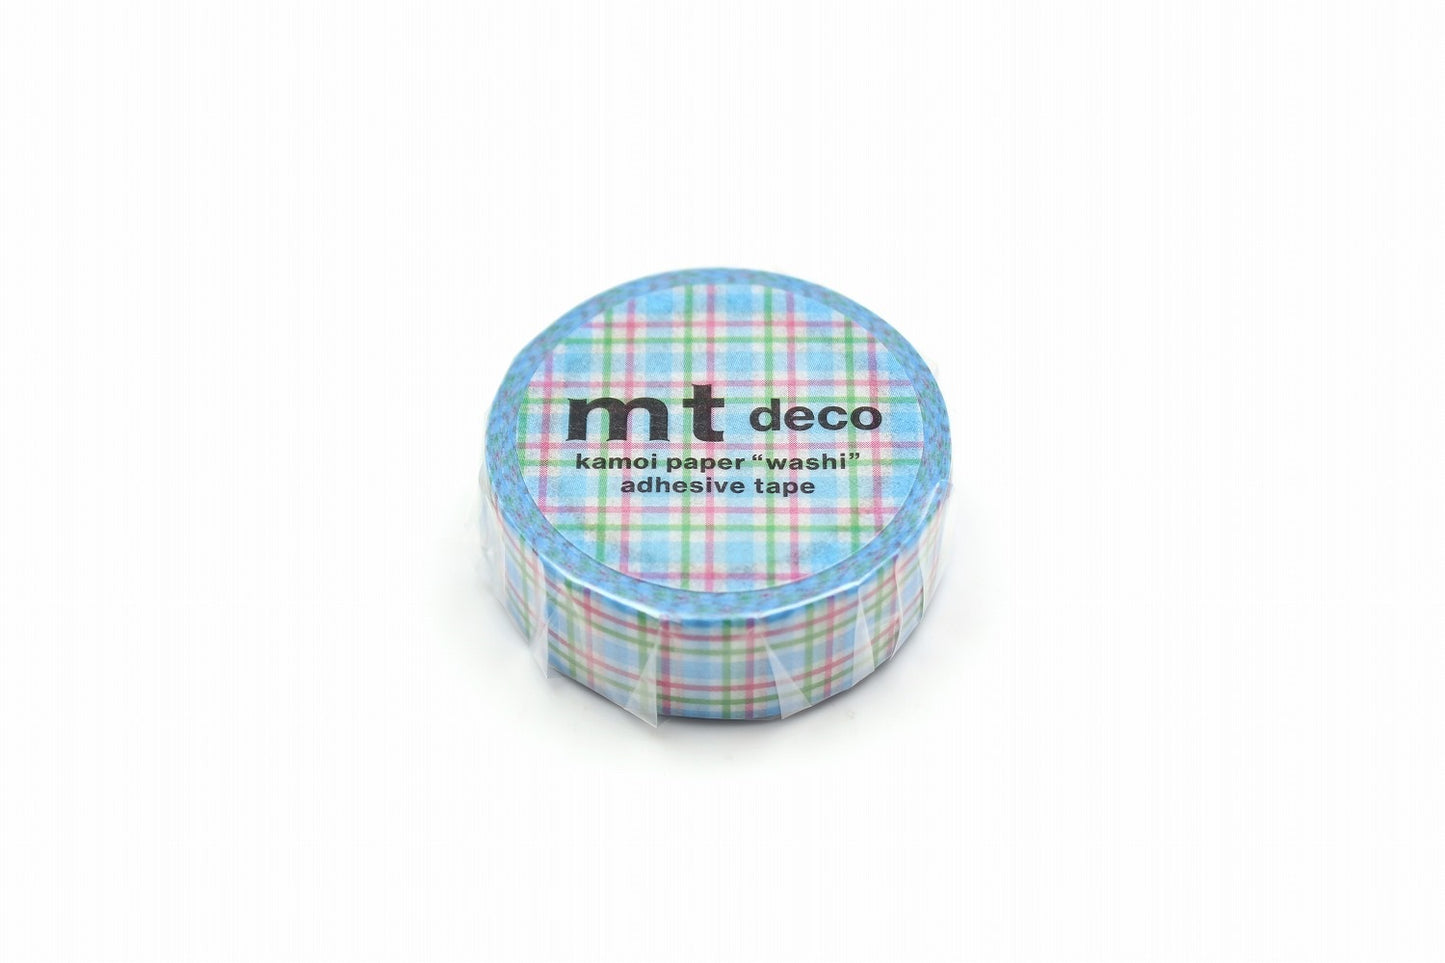 mt deco Colorful Gingham Check Blue Japanese Washi Tape